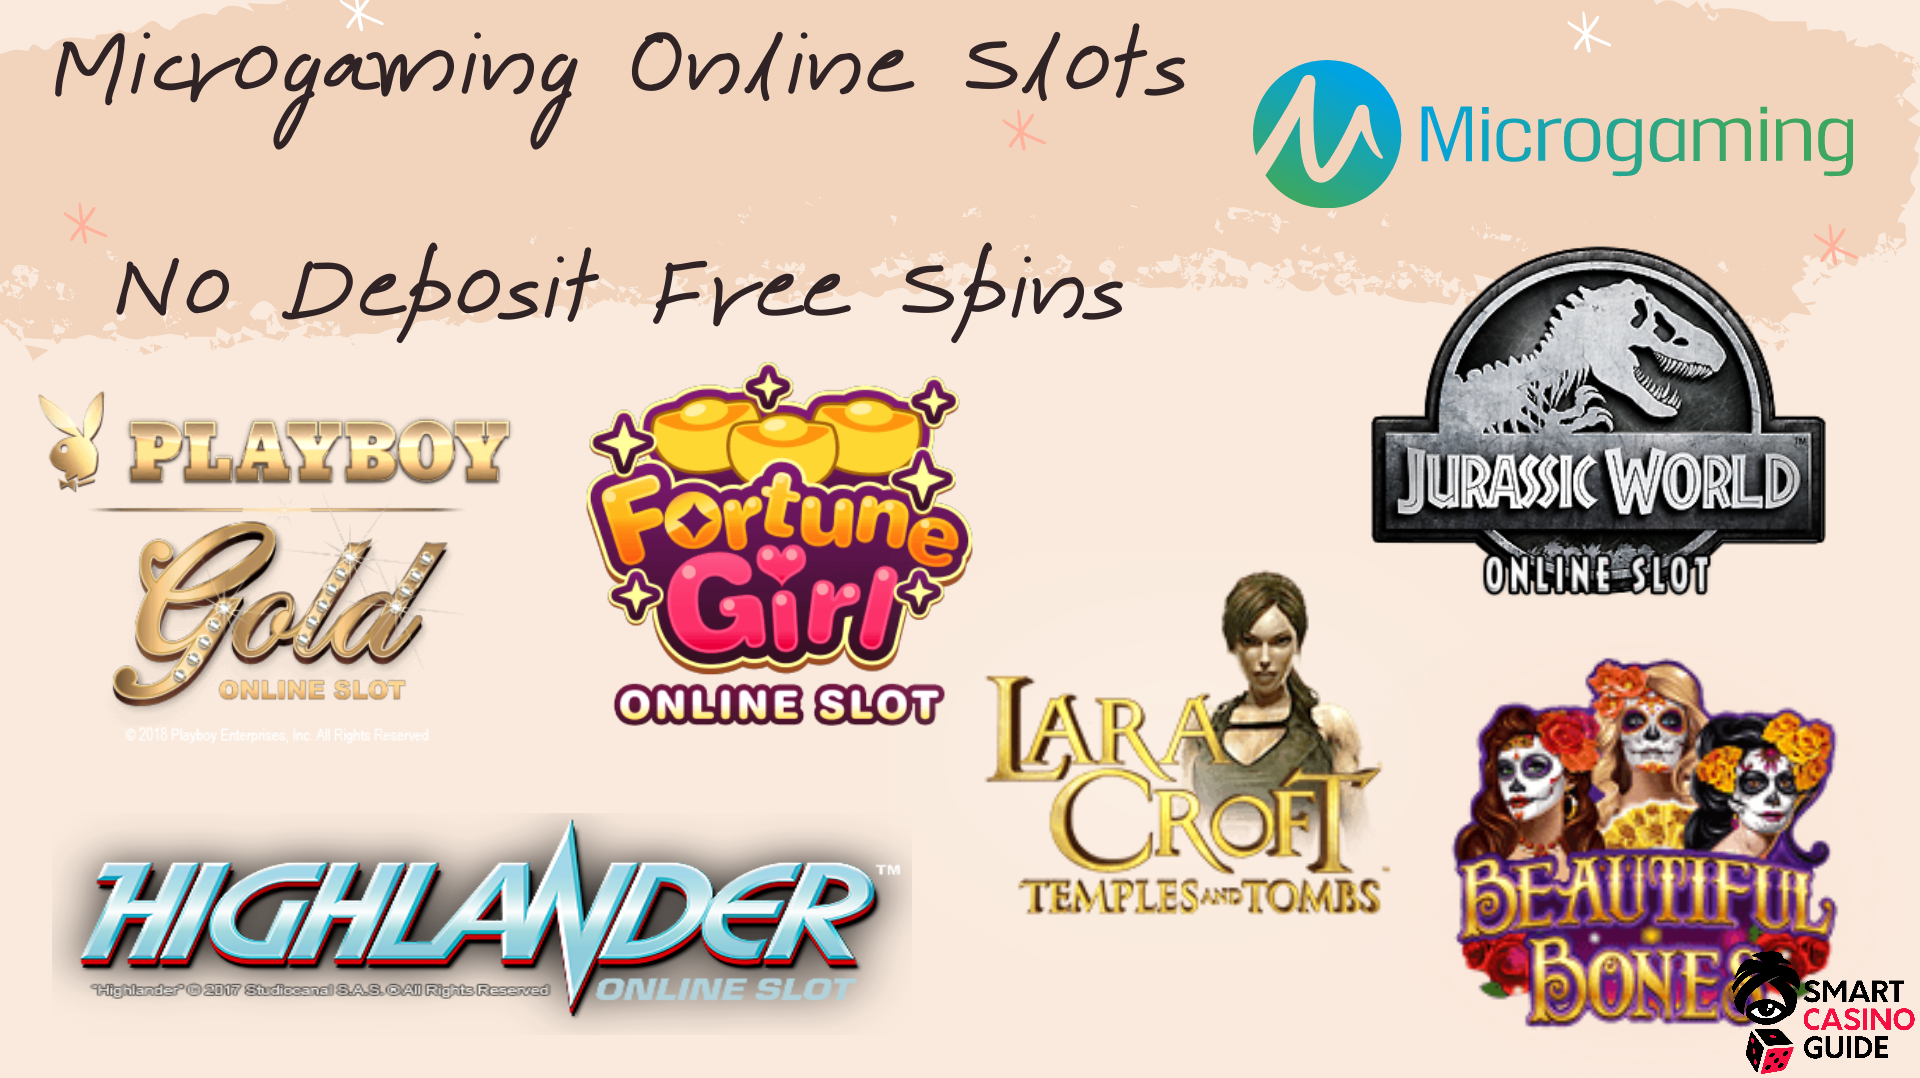 What Make real casino slots online Don't Want You To Know